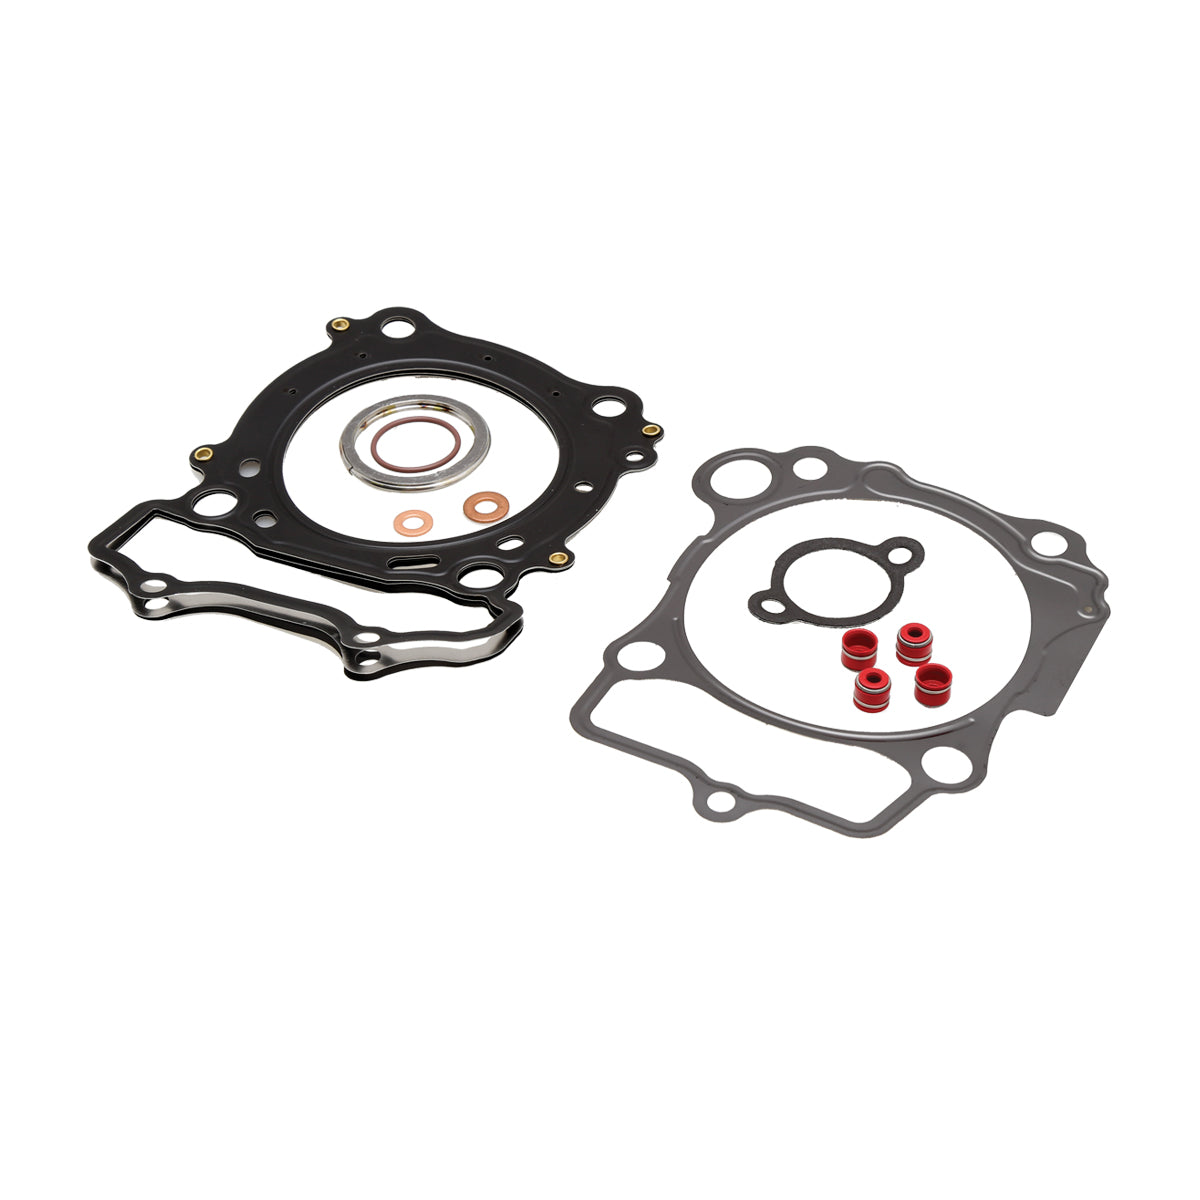 Gasket Kit, Replacement, Cometic, Yamaha®, Various YZ™/ WR™ 450’s, 2014-'21